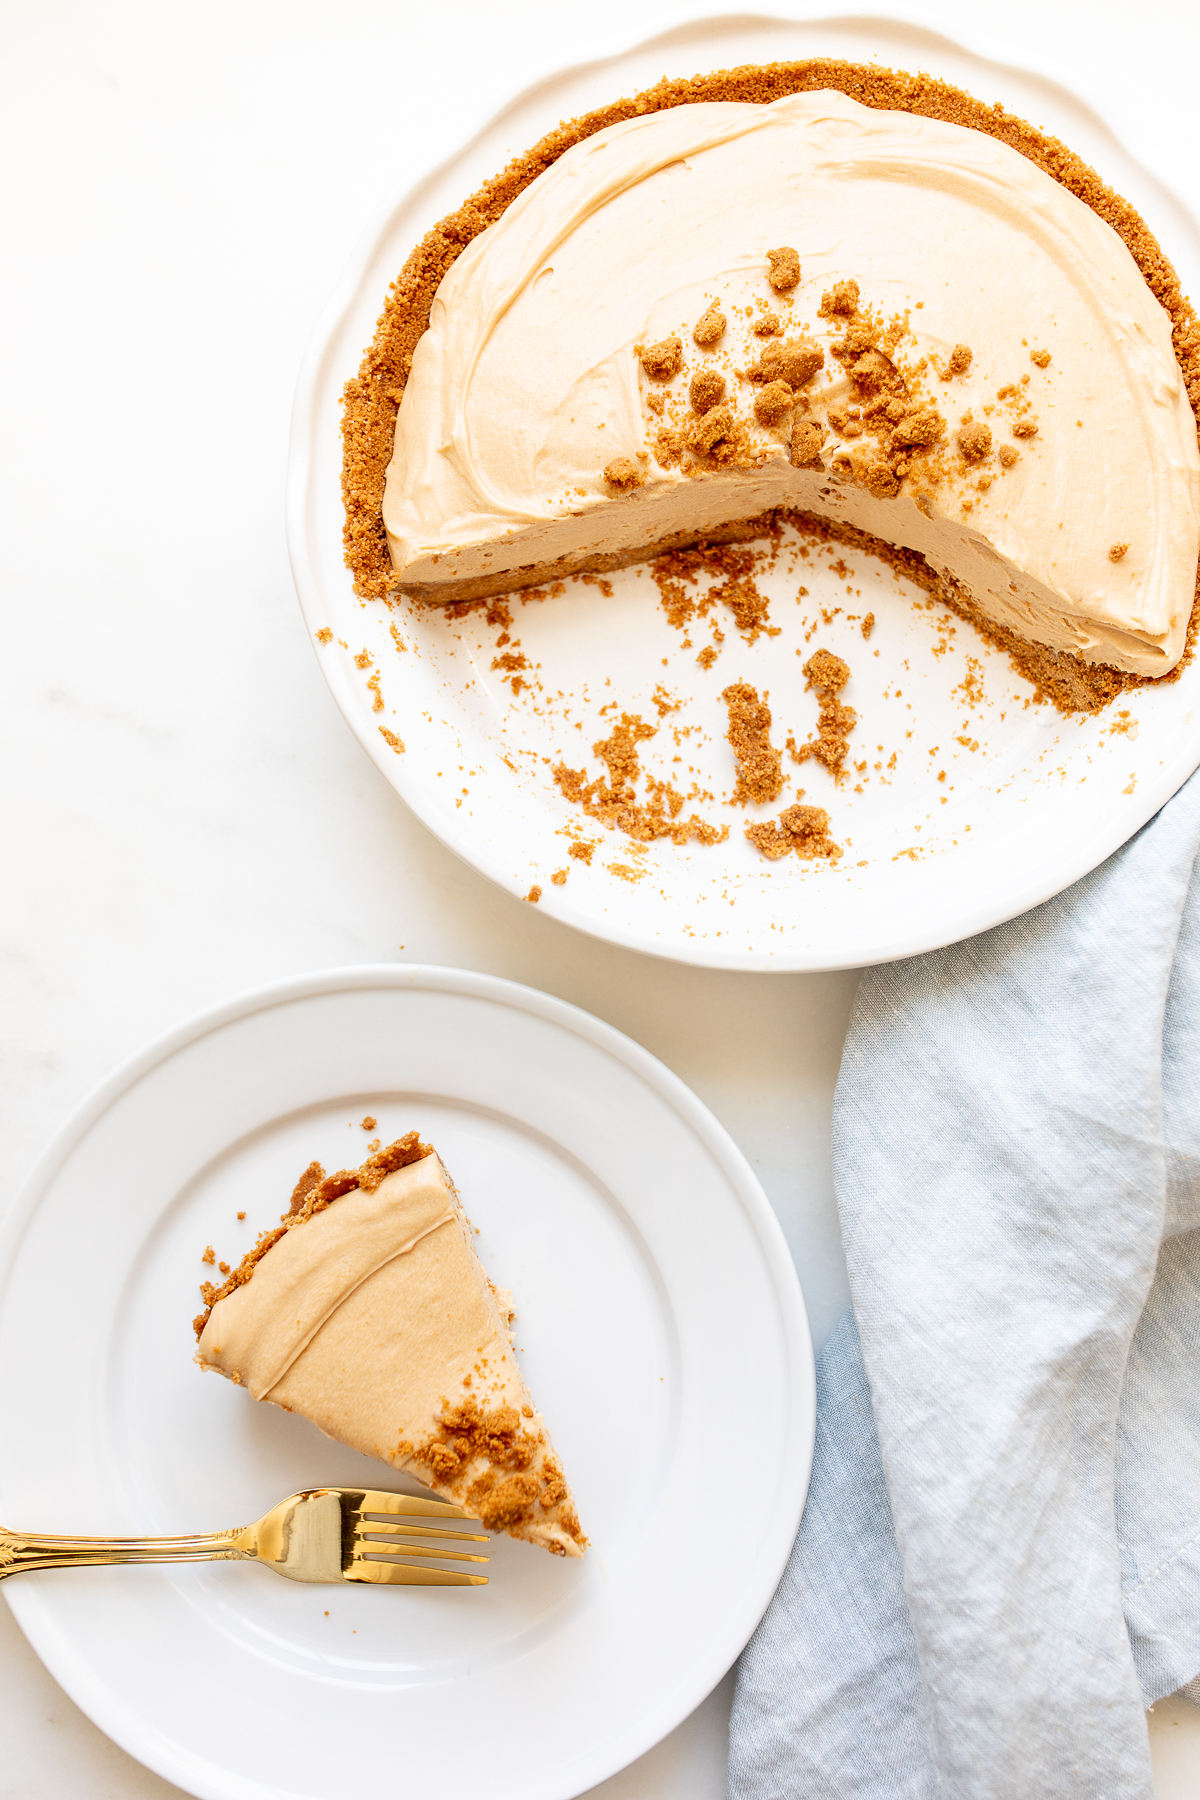 A no bake cookie butter pie with slices removed.